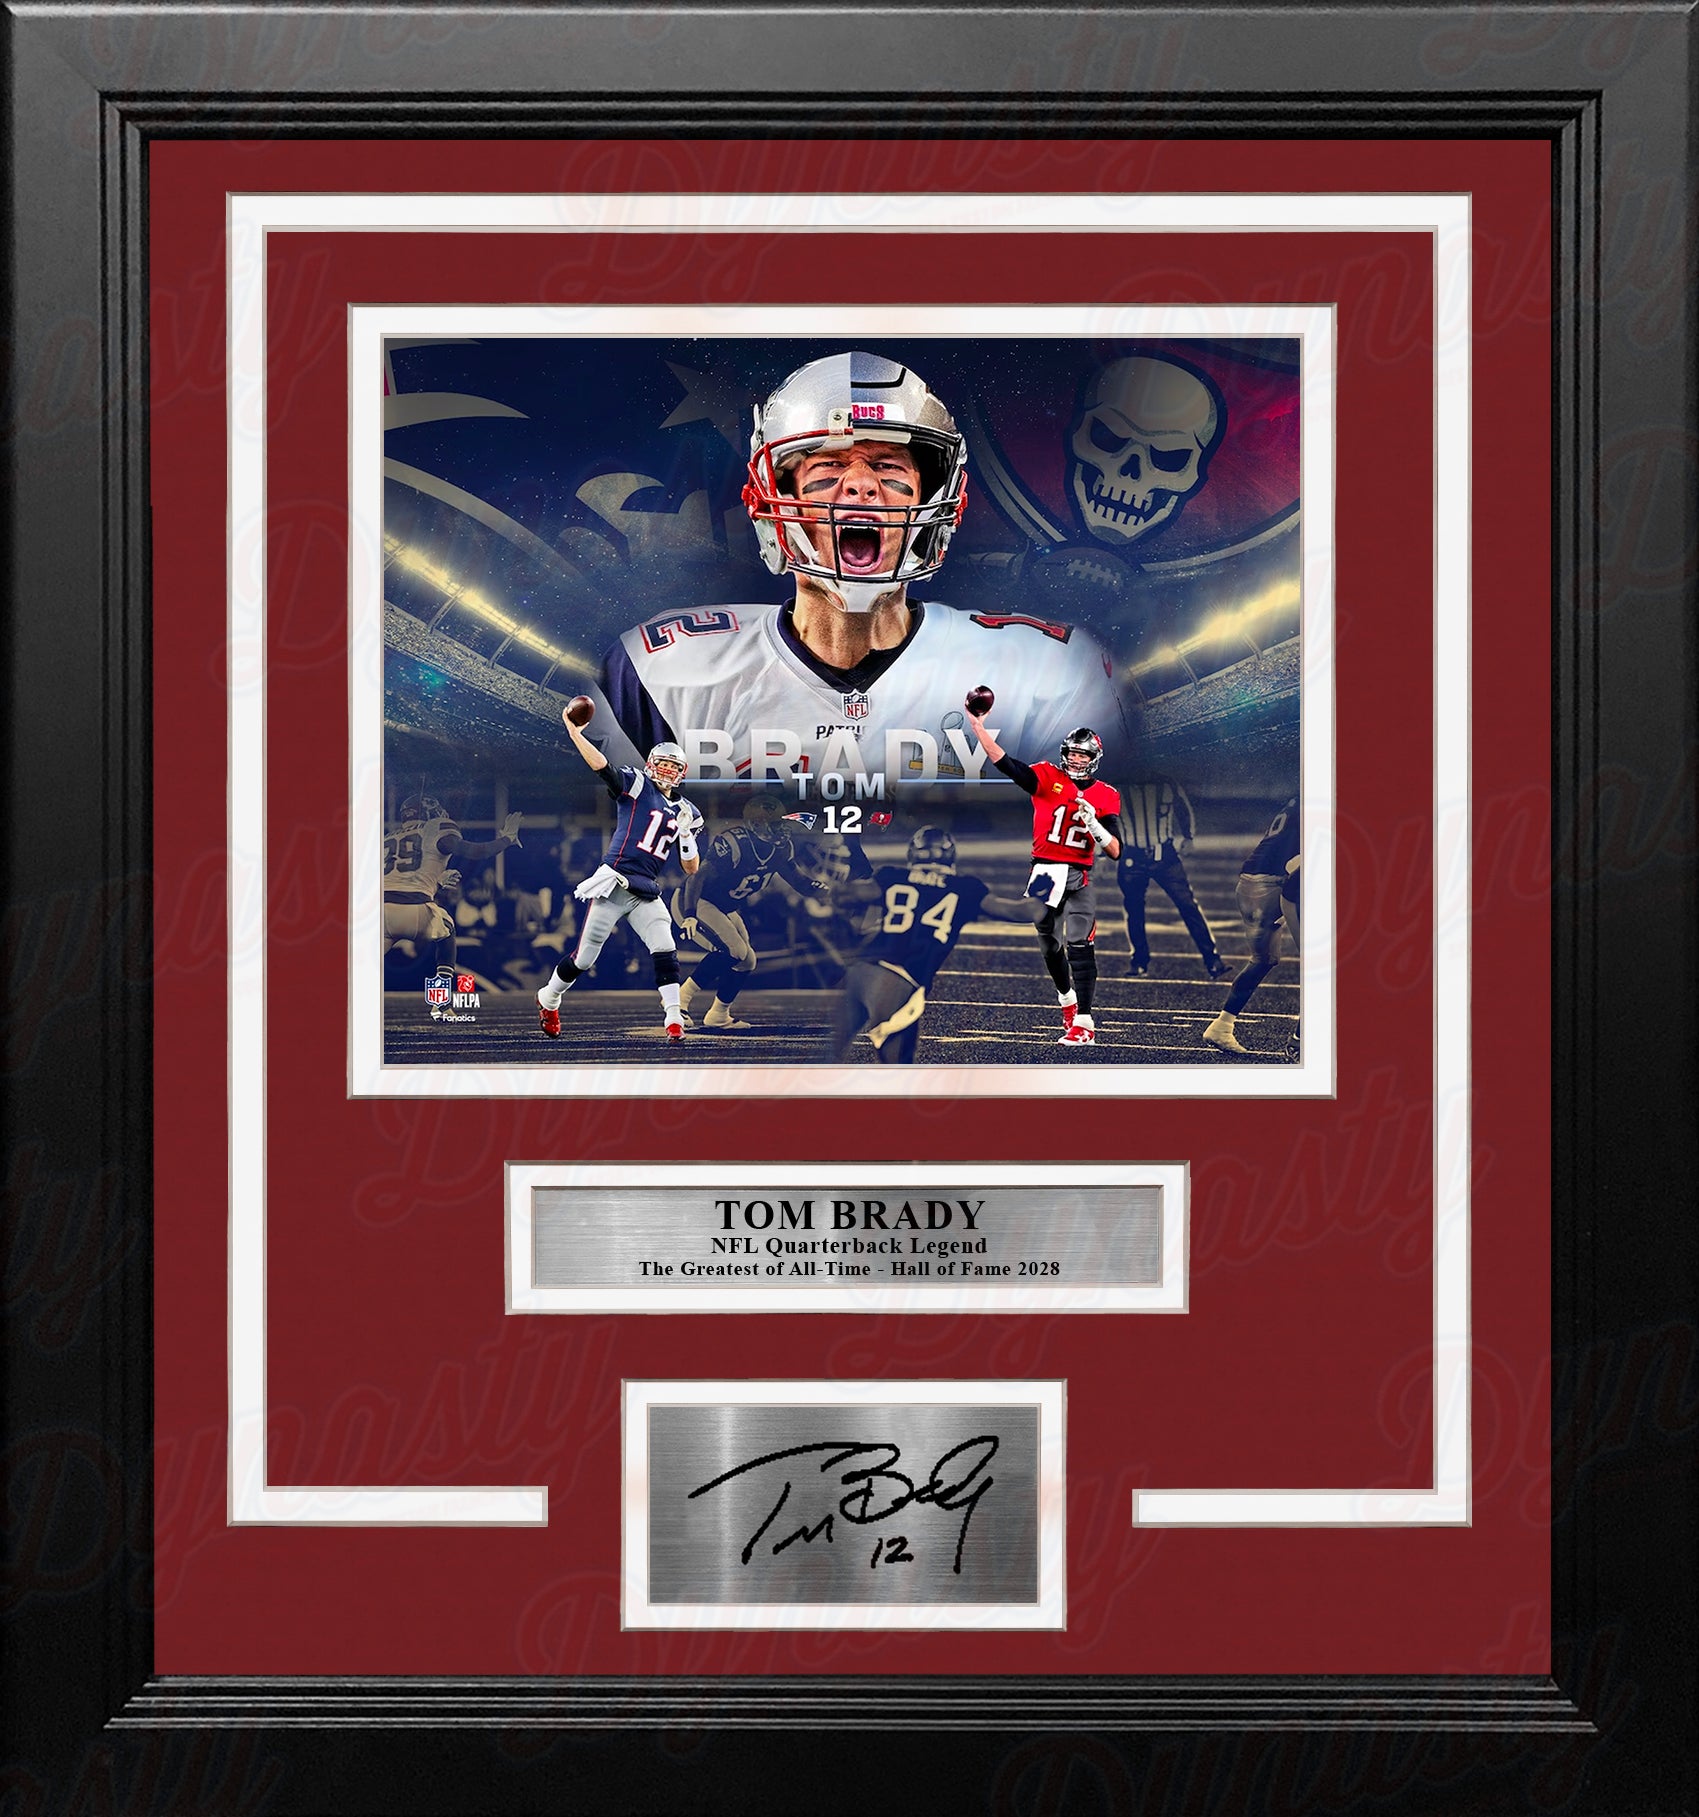 Tom Brady New England Patriots & Tampa Bay Buccaneers 8x10 Framed Photo with Engraved Autograph - Dynasty Sports & Framing 